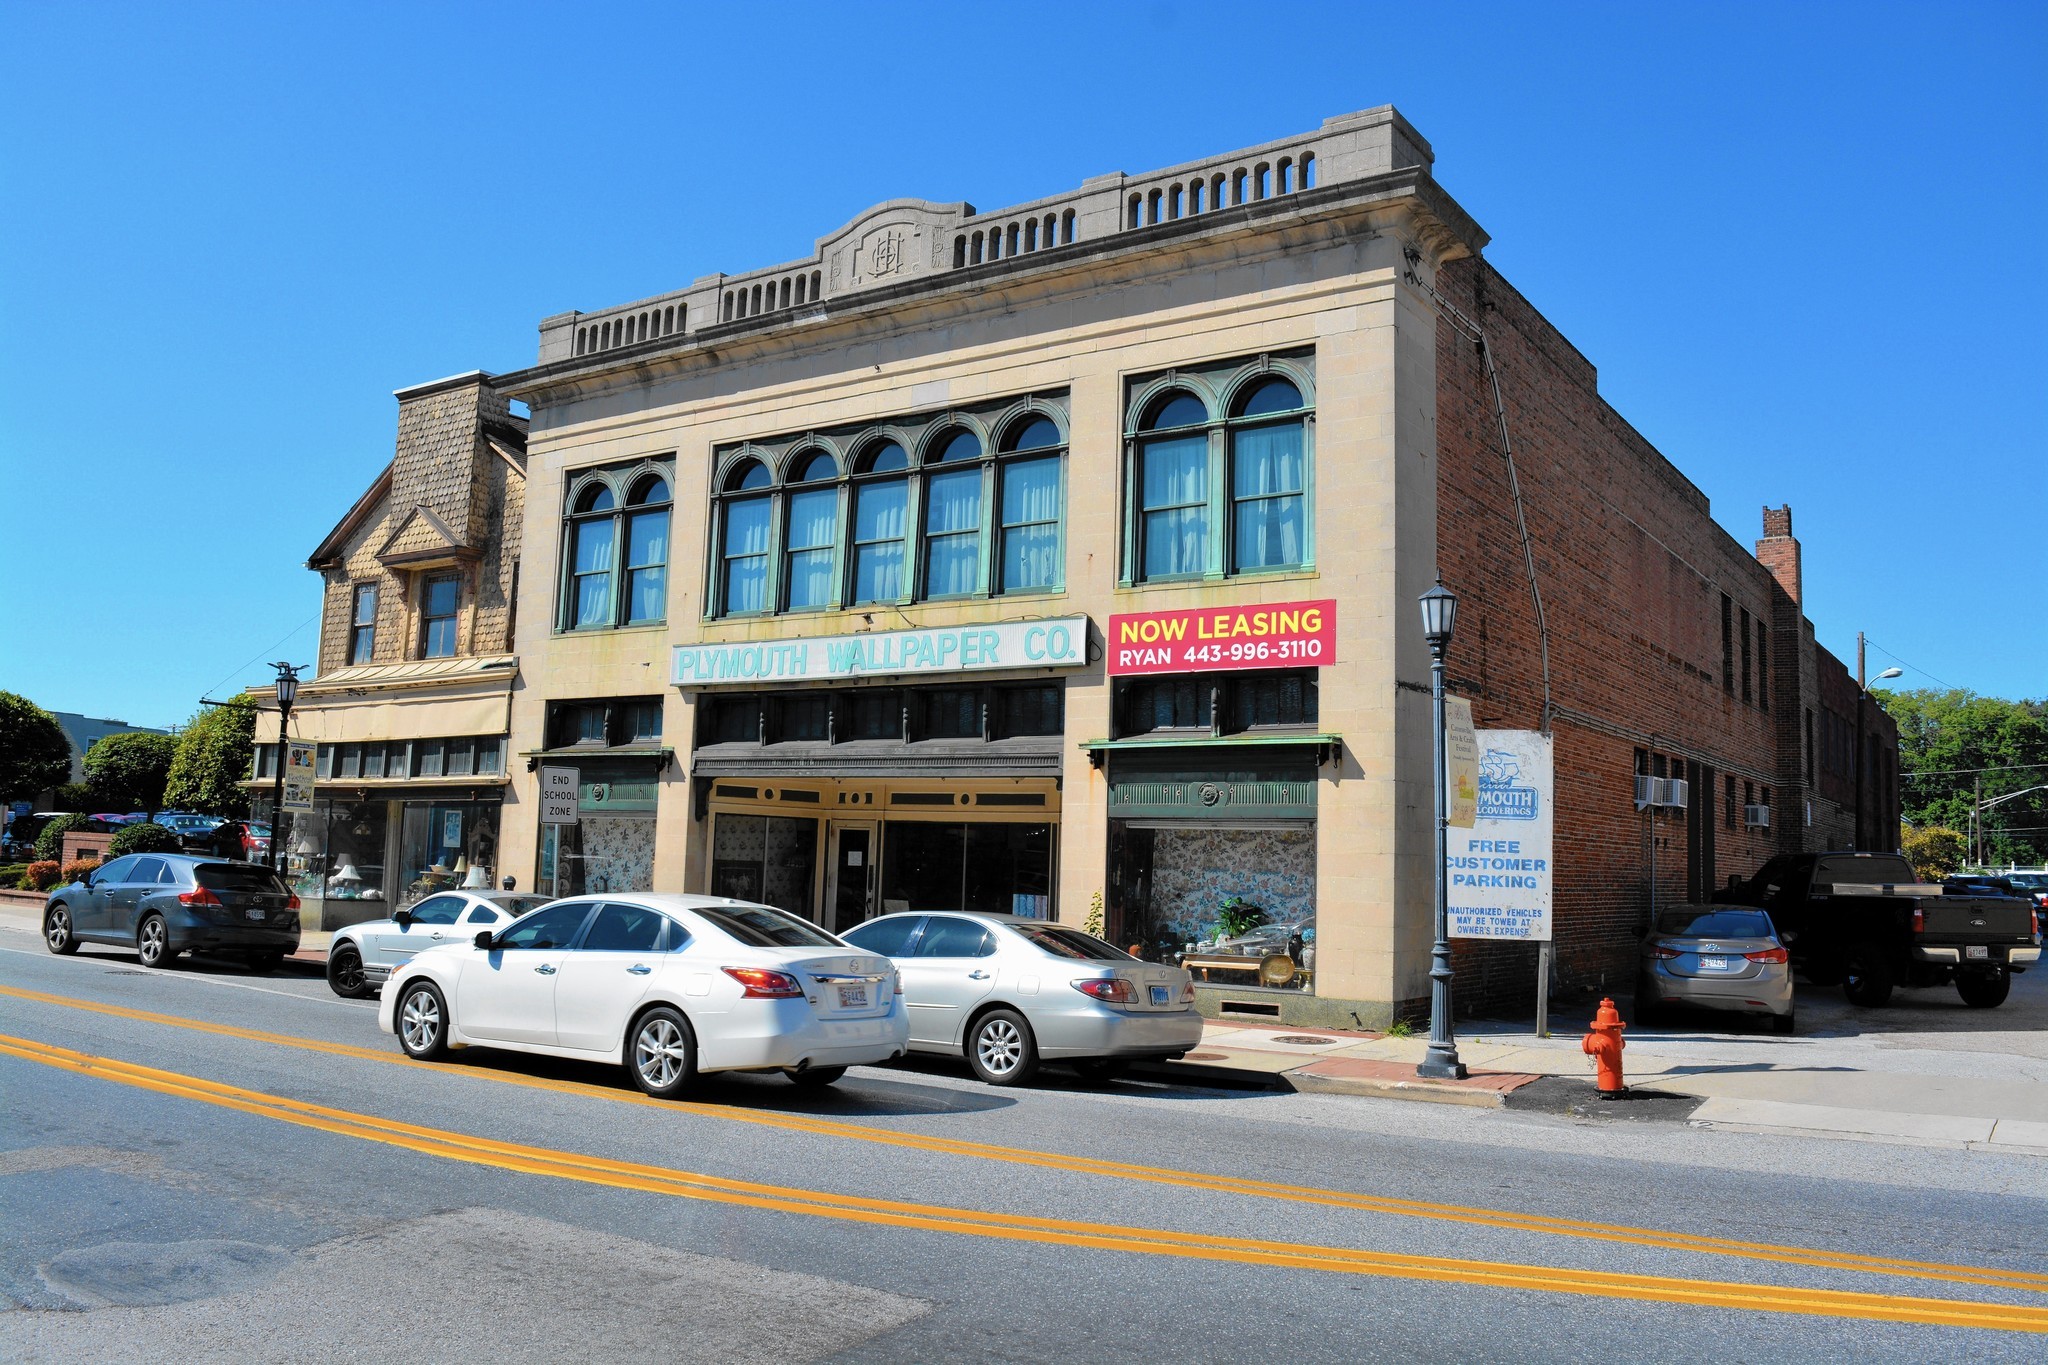 Plymouth wallpaper co closes catonsville store studies options for future â baltimore sun